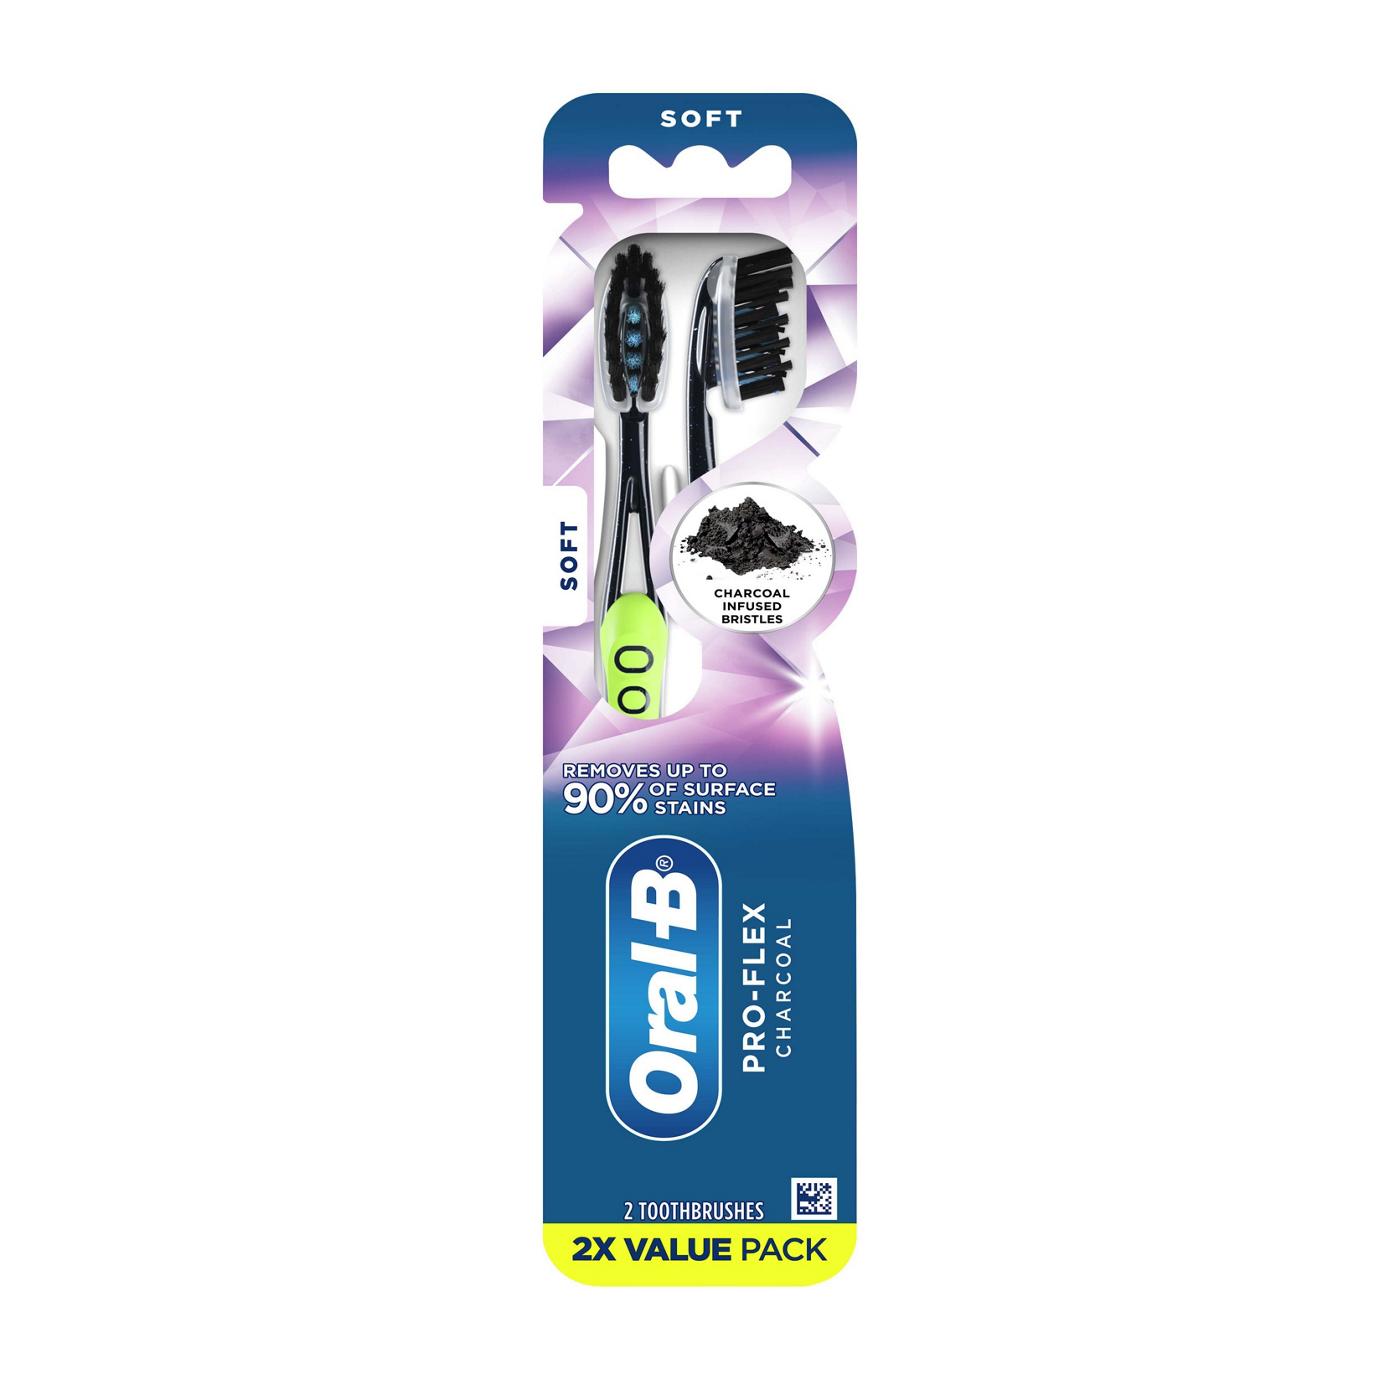 Oral-B Pro-Flex Charcoal Infused Soft Toothbrush; image 1 of 8